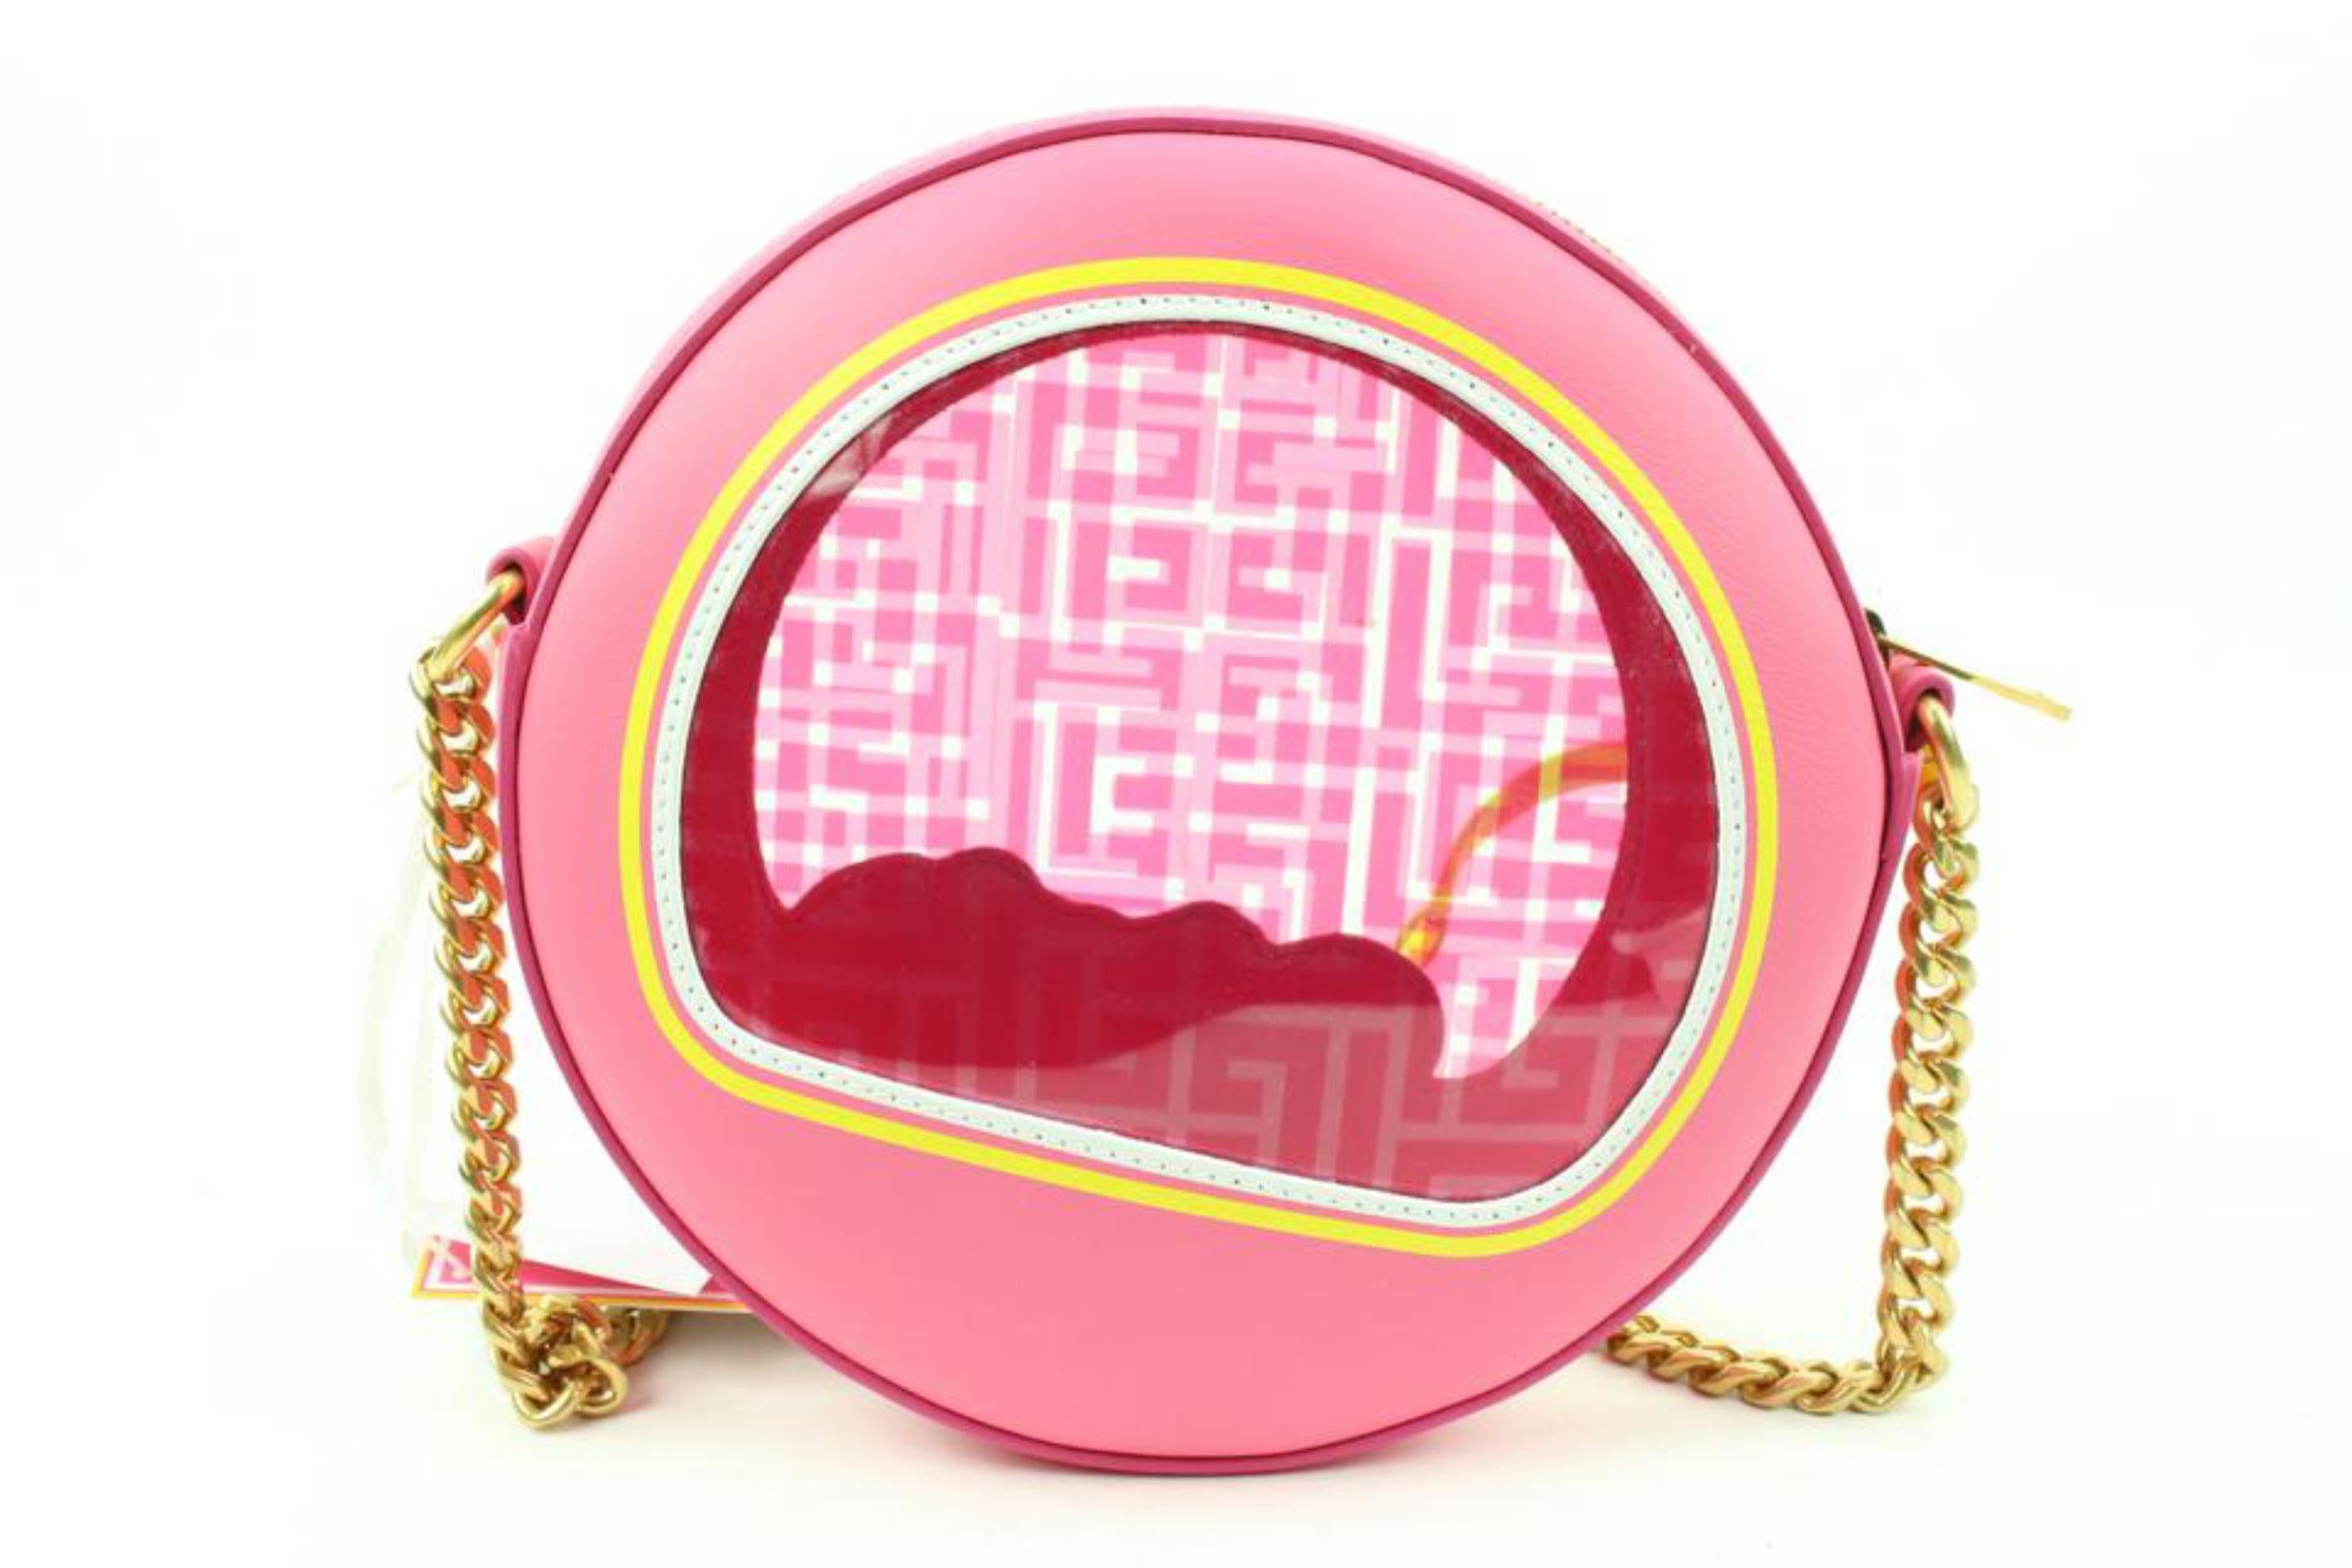 Balmain Barbie Translucent Pink Disco Round  Crossbody Bag  1BM318 In New Condition For Sale In Dix hills, NY